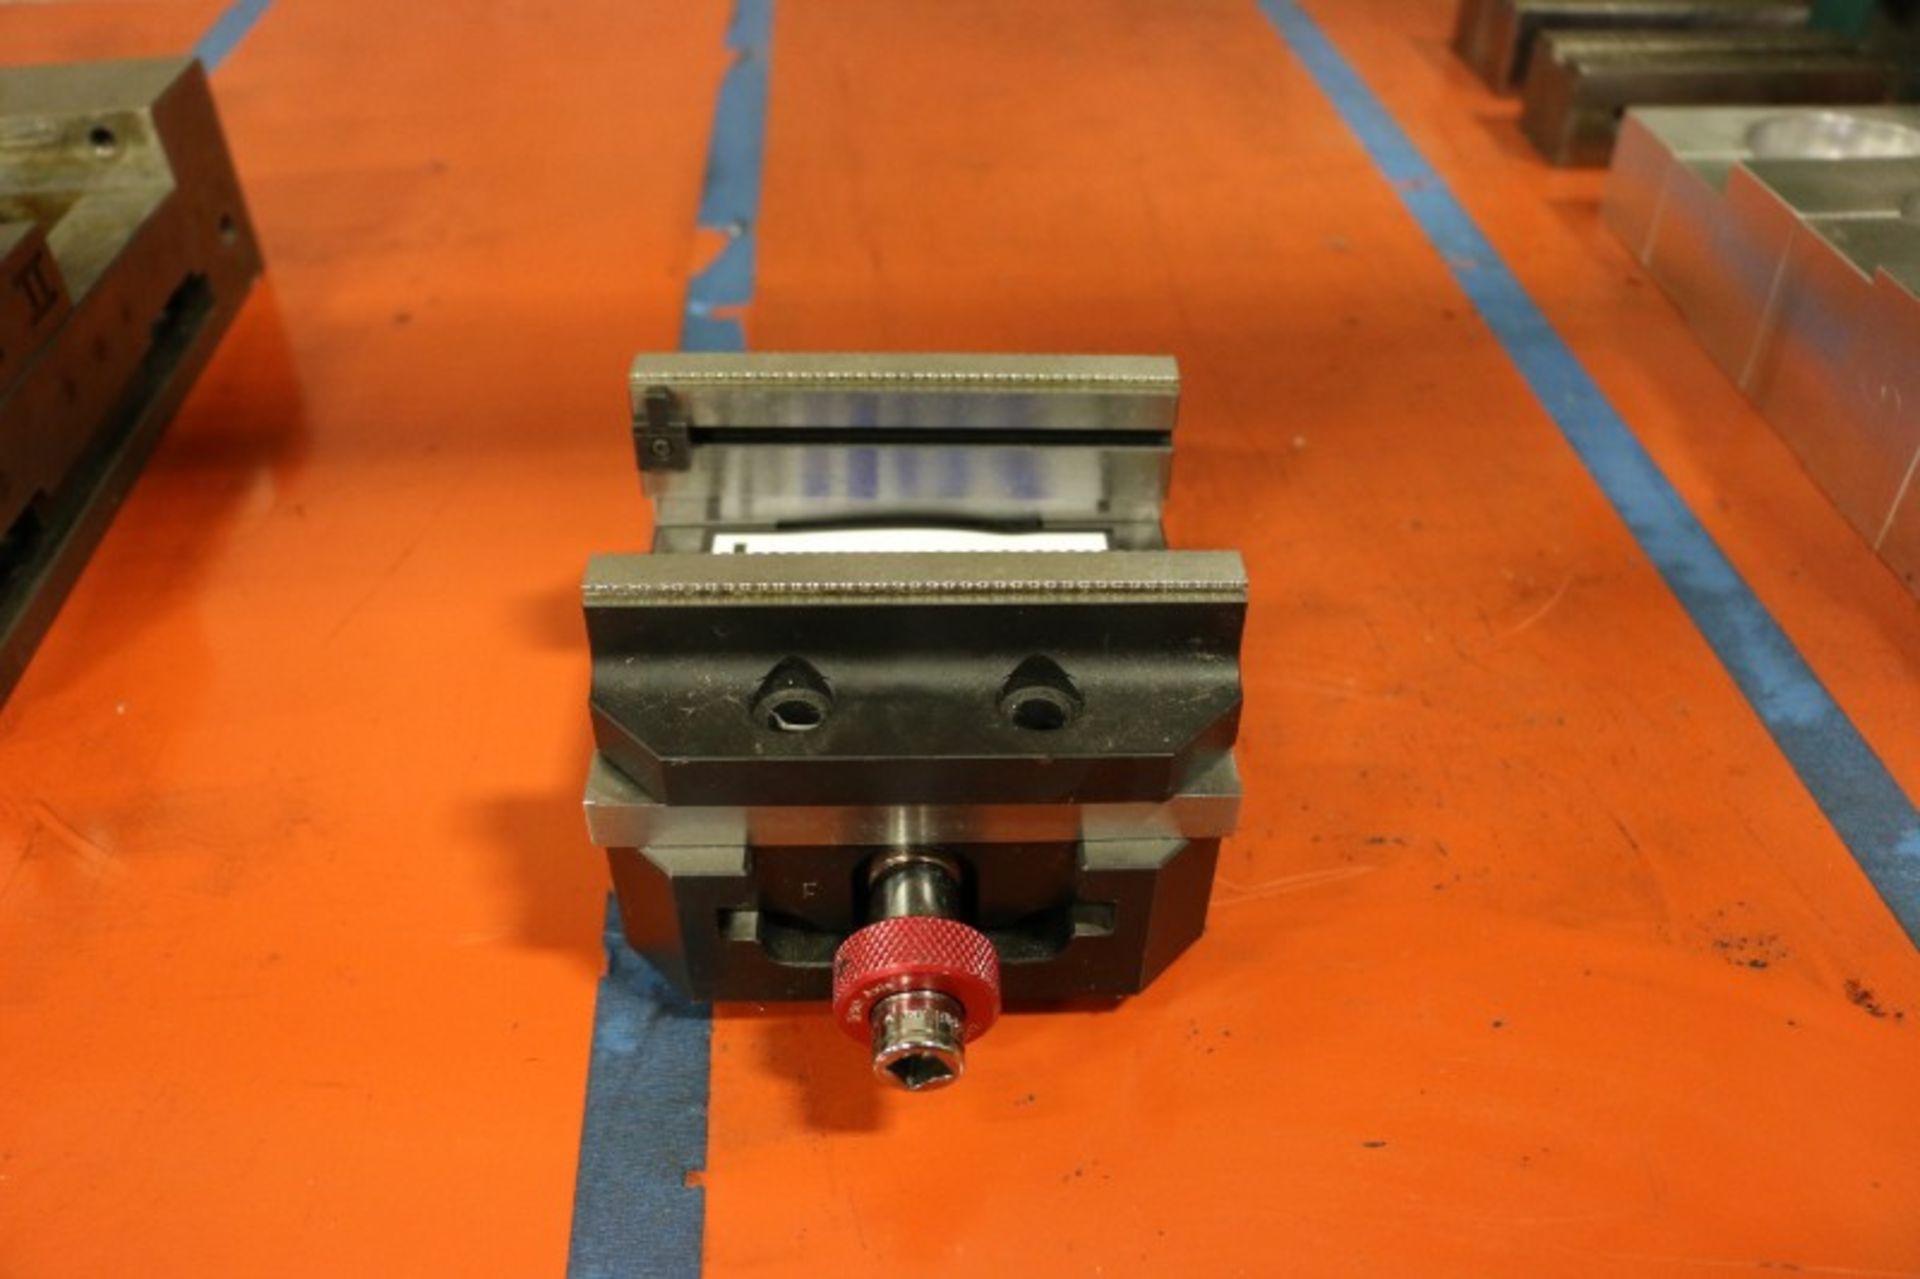 5th Axis Vise